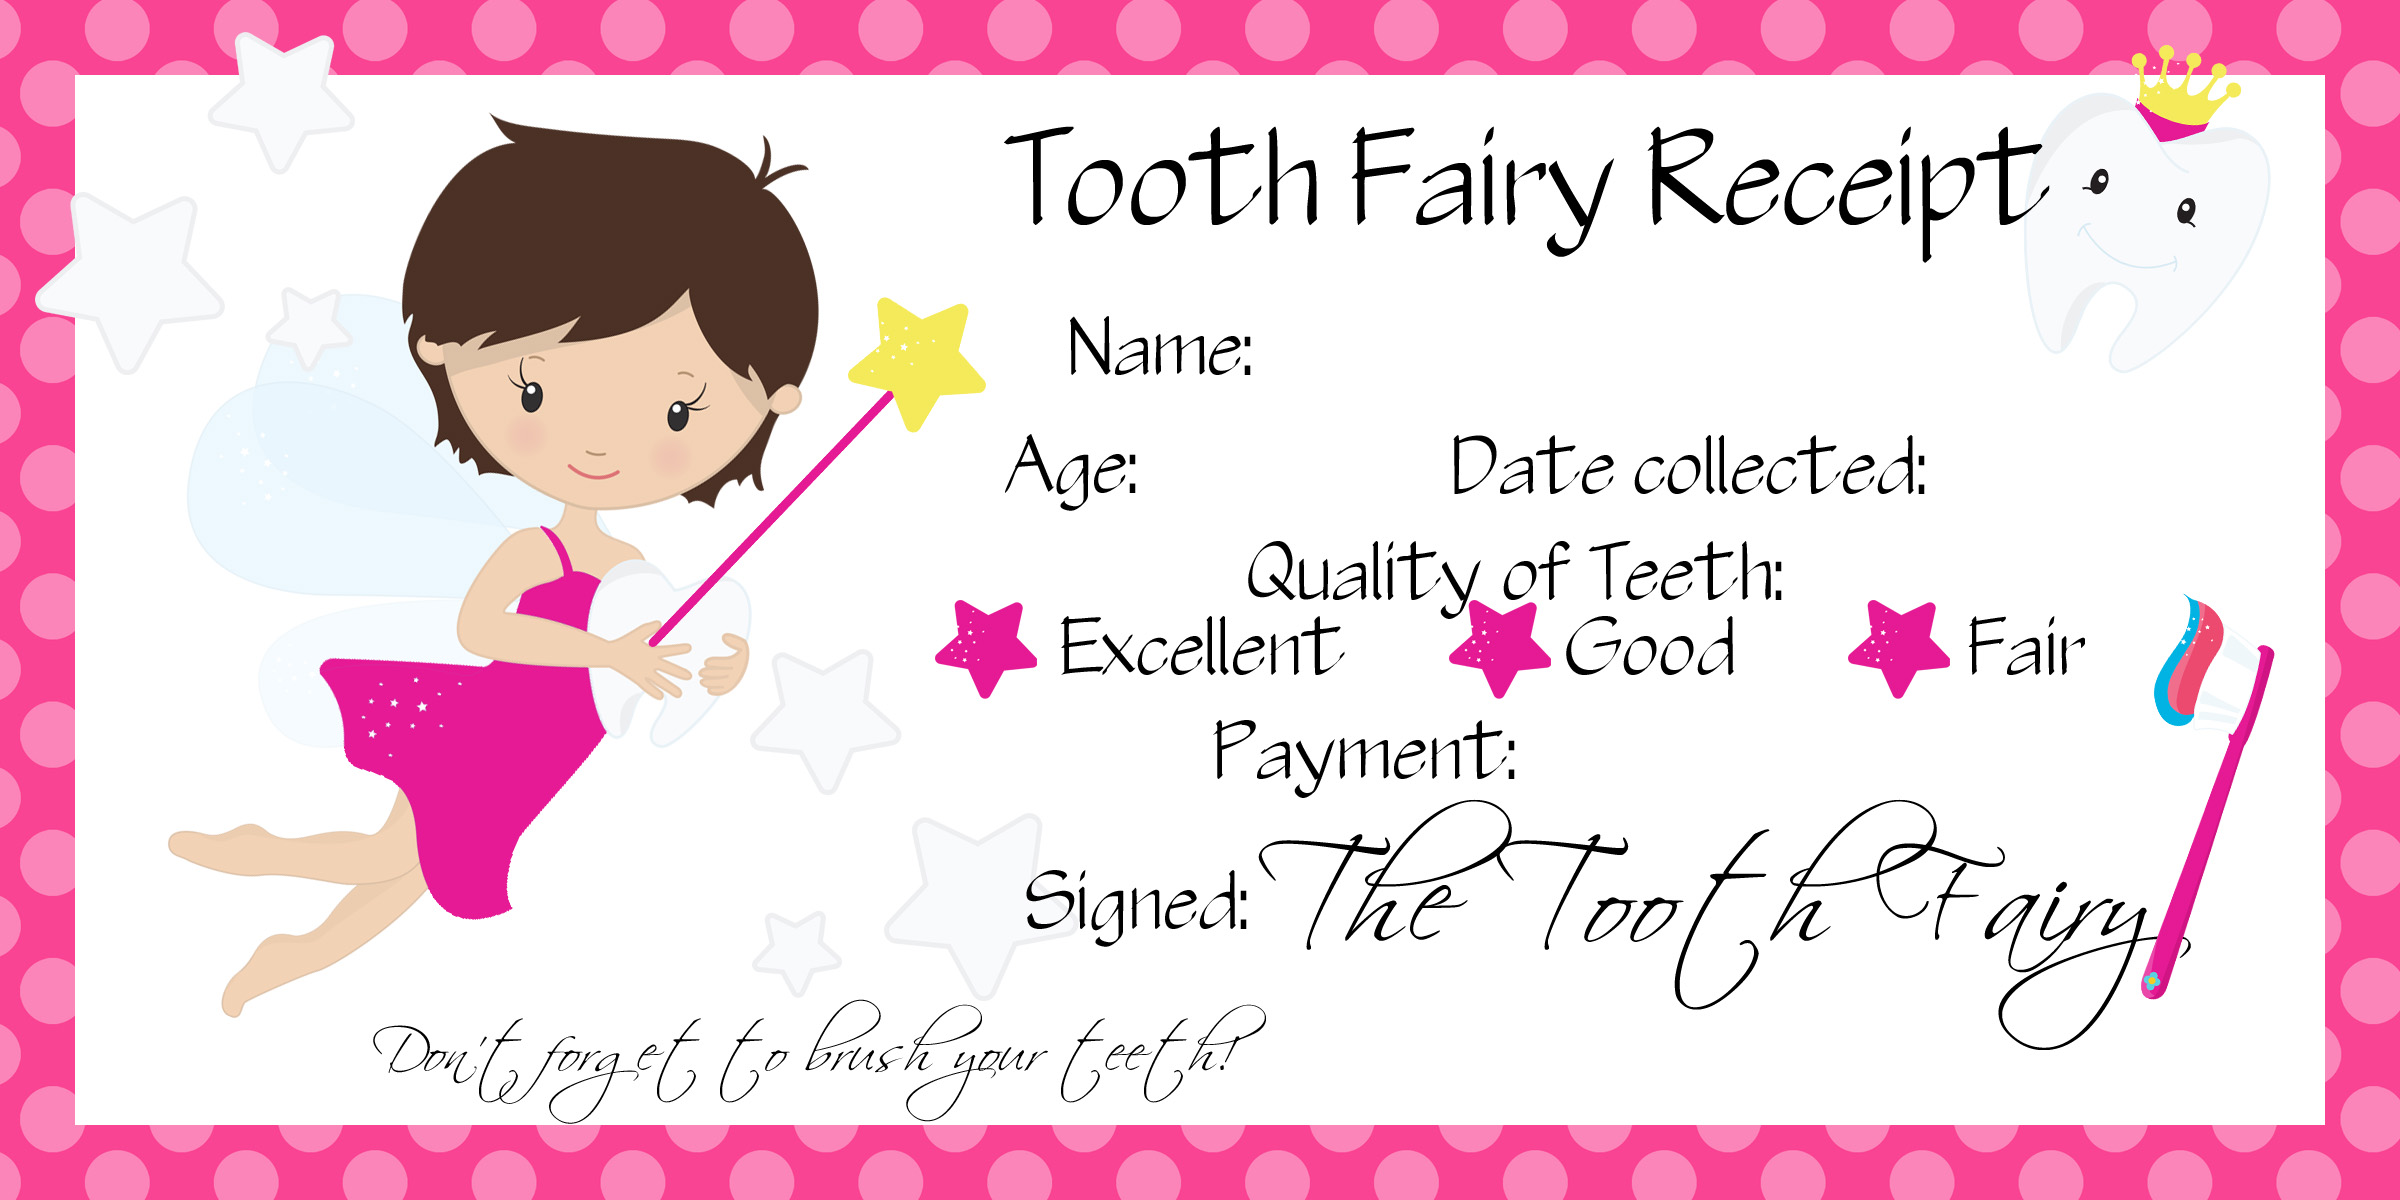 o-s-first-lost-tooth-tooth-fairy-receipt-free-printable-jeni-ro